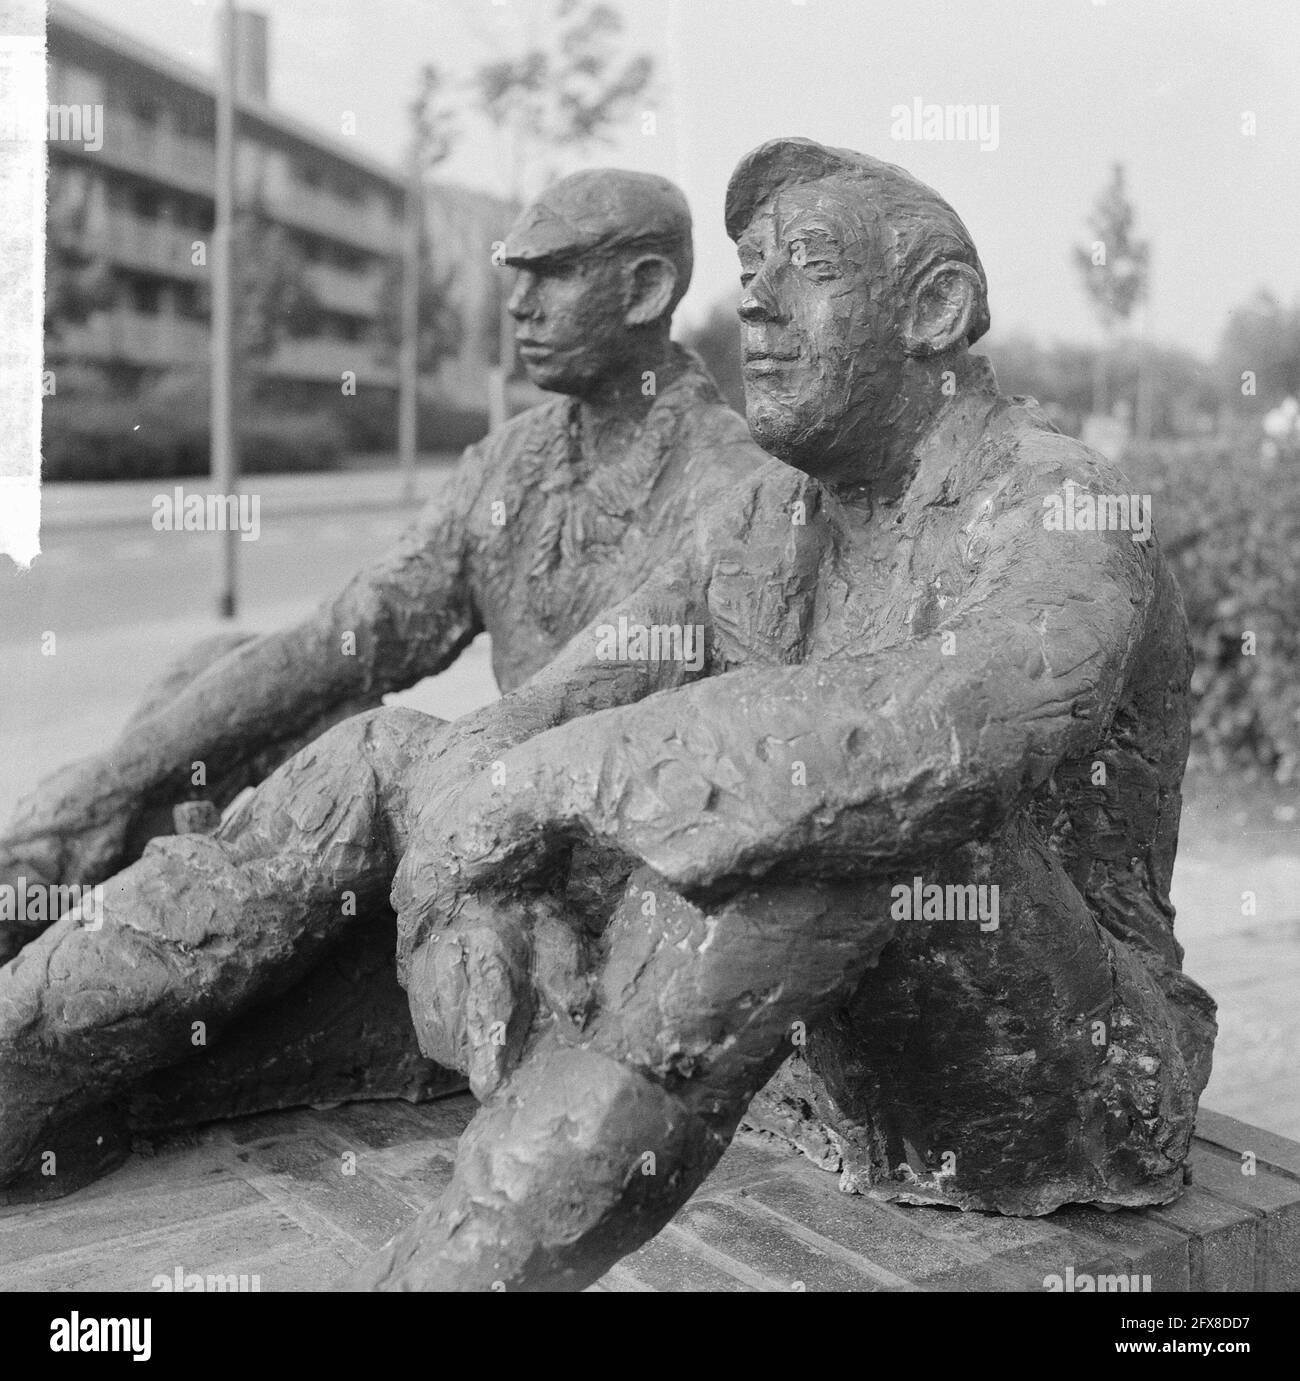 Statuette of Bayens, labouring workers, October 12, 1964, ARBEIDERS, sculptures, The Netherlands, 20th century press agency photo, news to remember, documentary, historic photography 1945-1990, visual stories, human history of the Twentieth Century, capturing moments in time Stock Photo